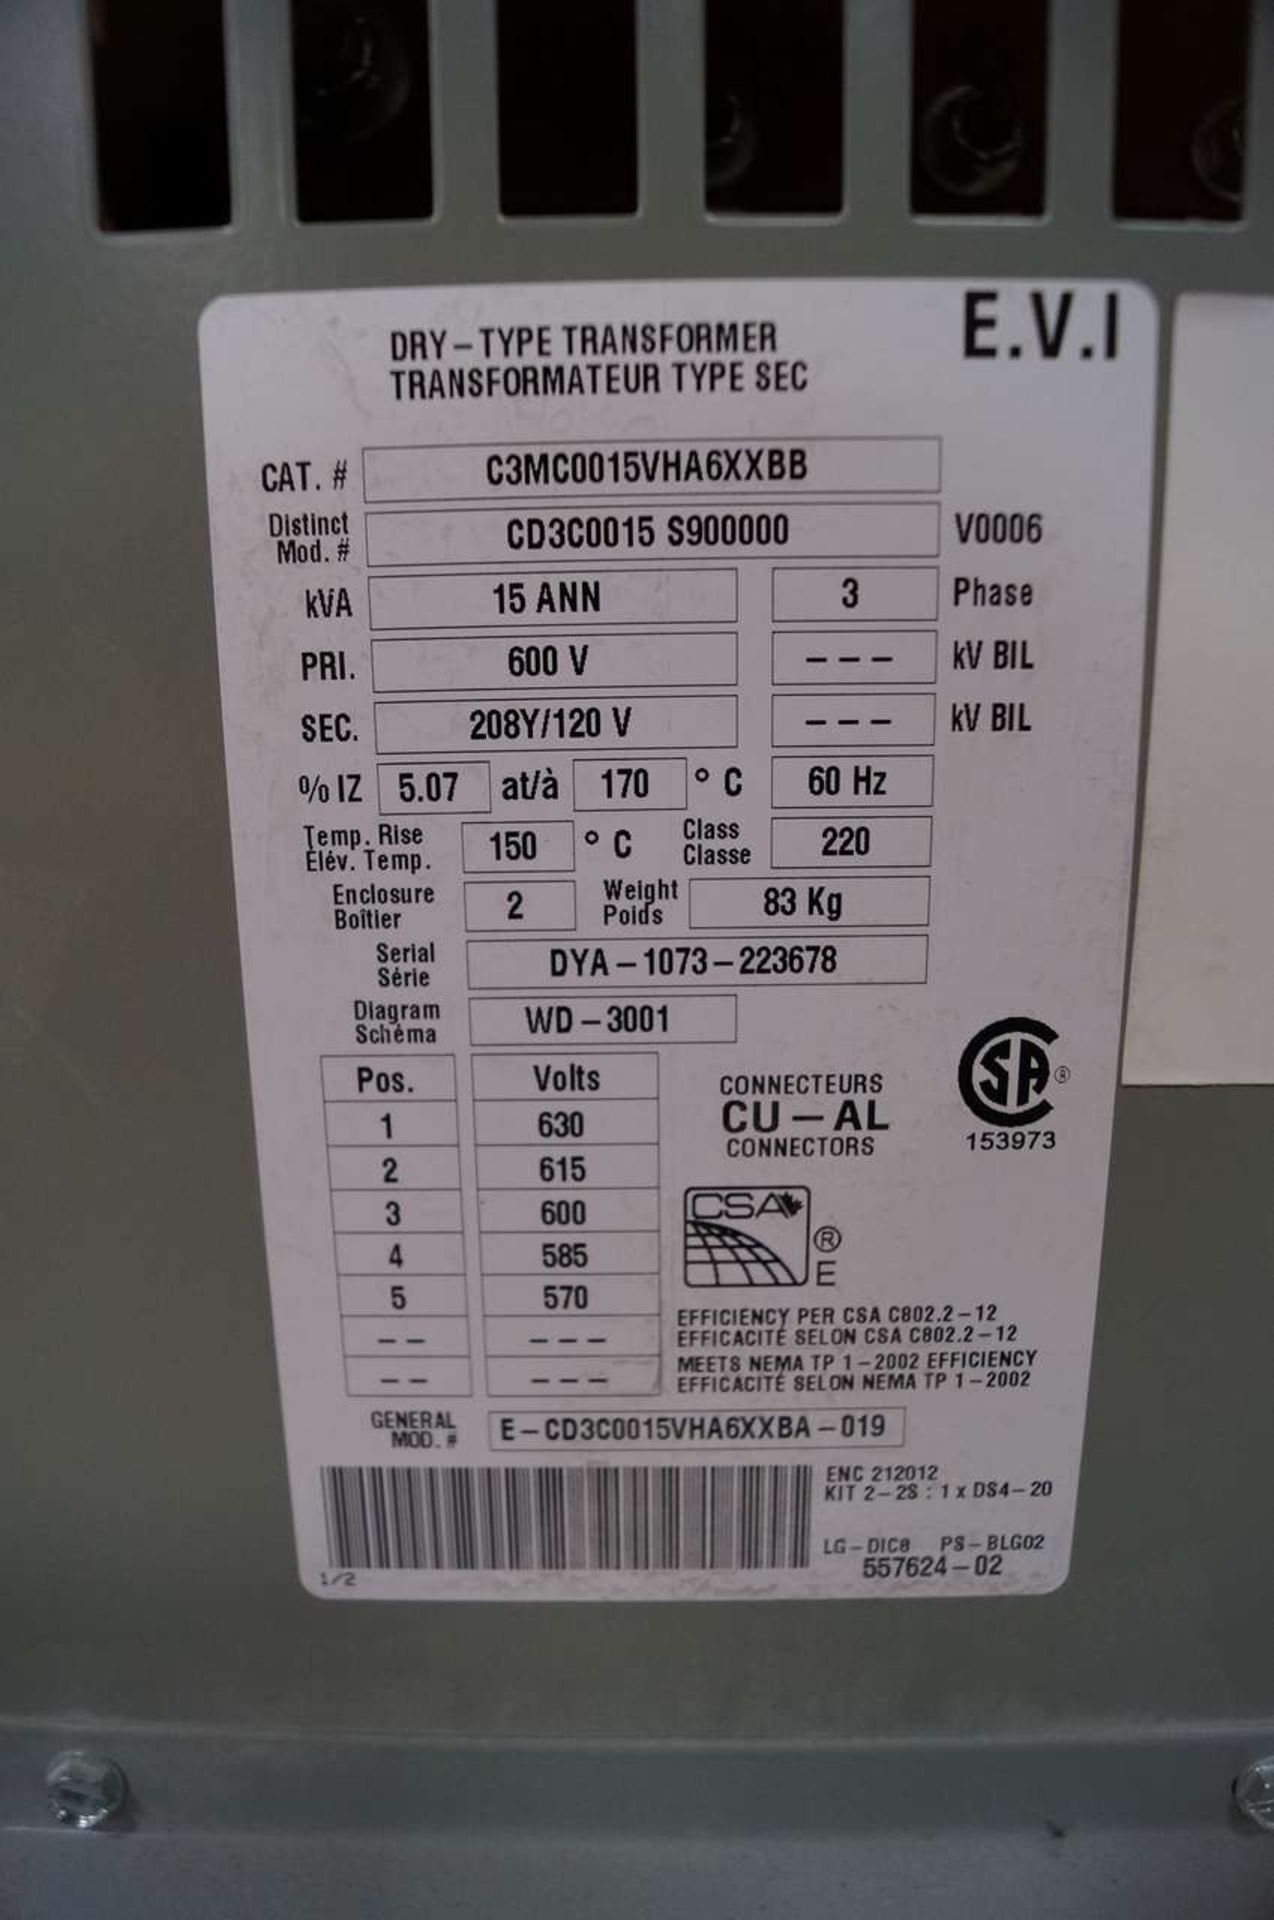 Commercial Series C802 Dry Type Transformer - Image 2 of 3